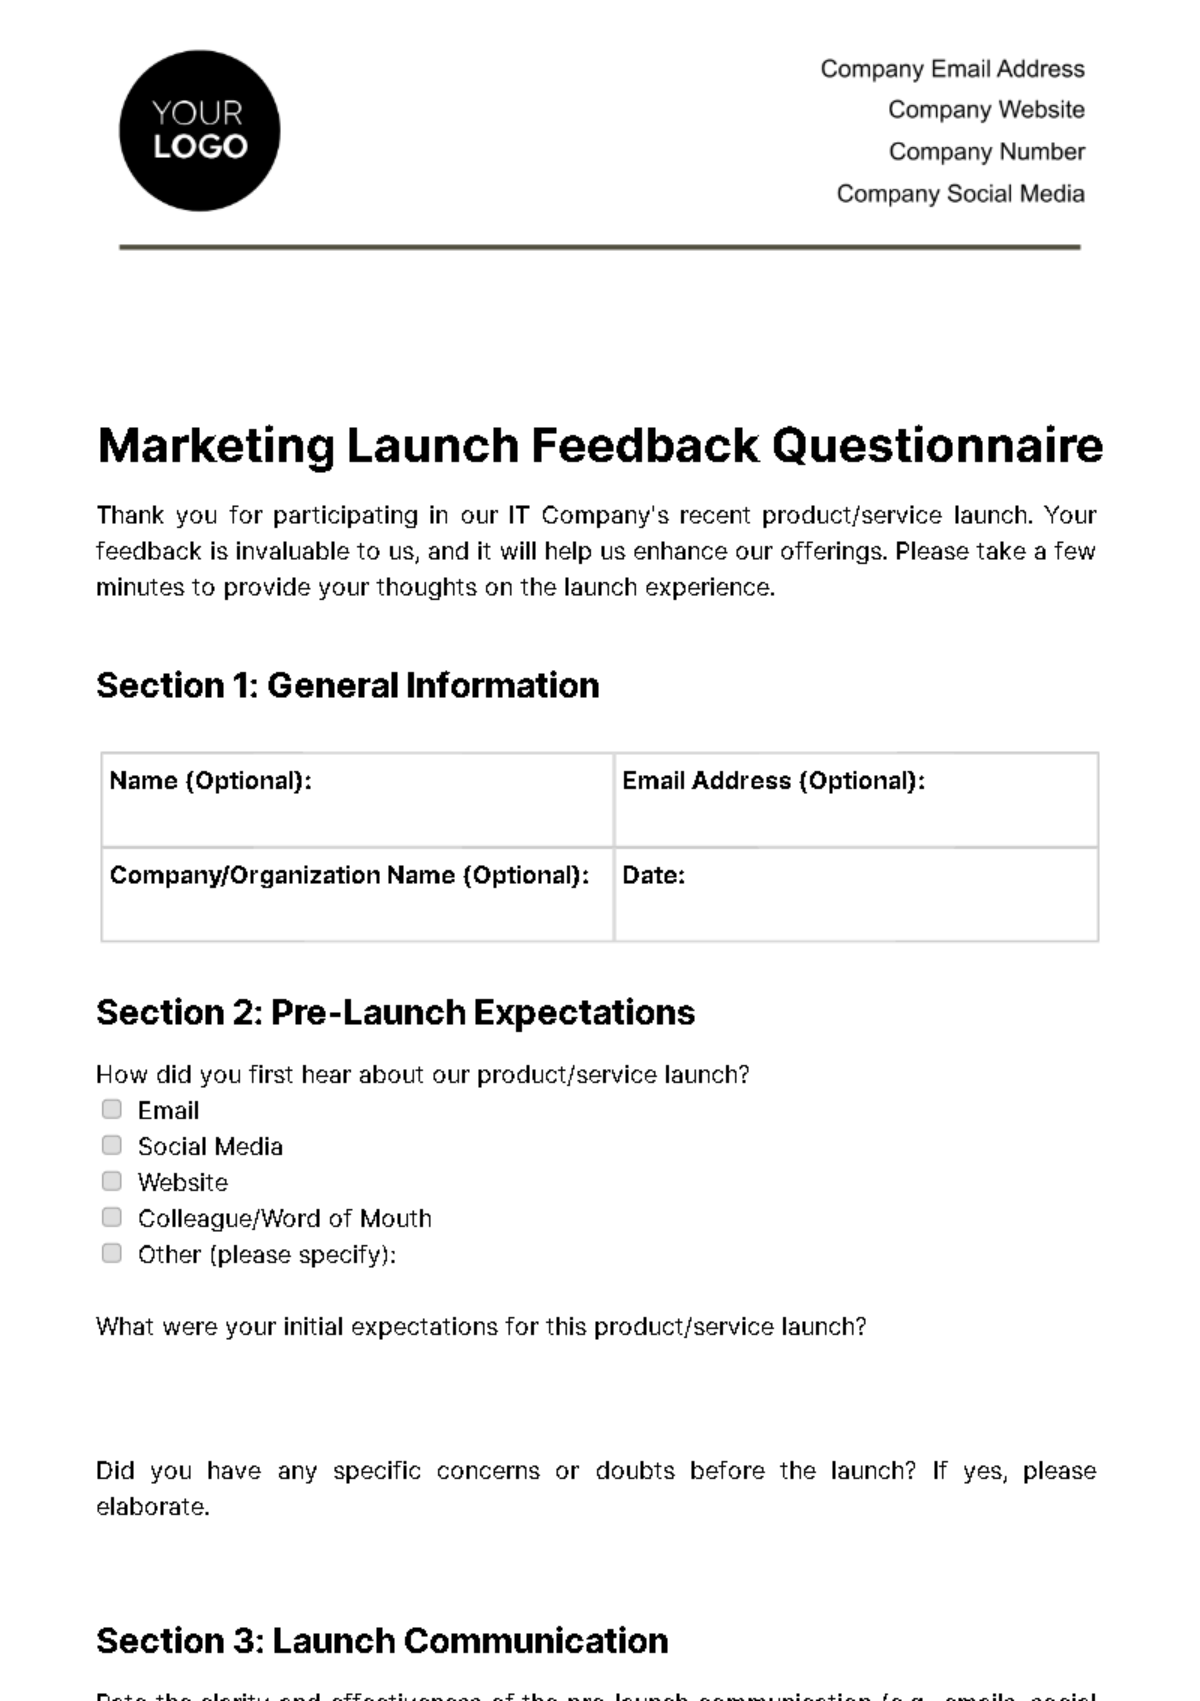 Marketing Launch Feedback Questionnaire Template